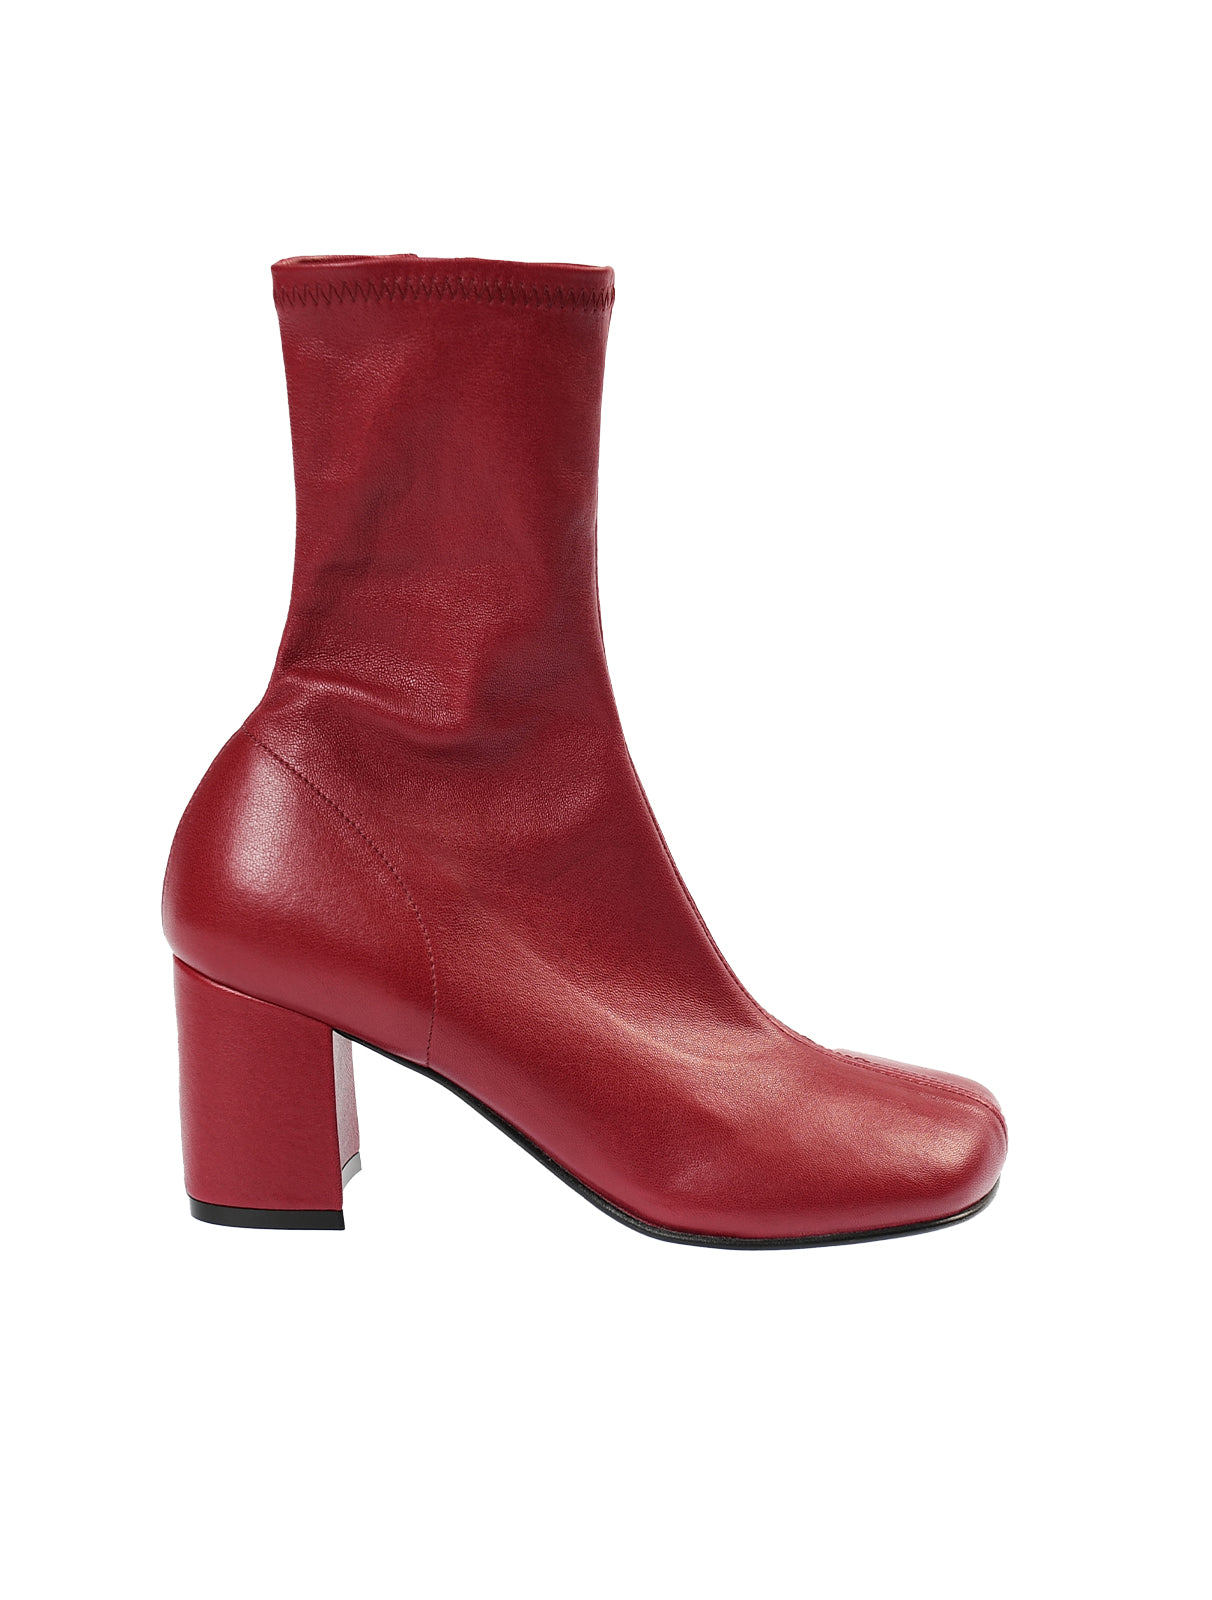 Love these red leather ankle boots. … | Chunky heel ankle boots, Trending  womens shoes, Heels